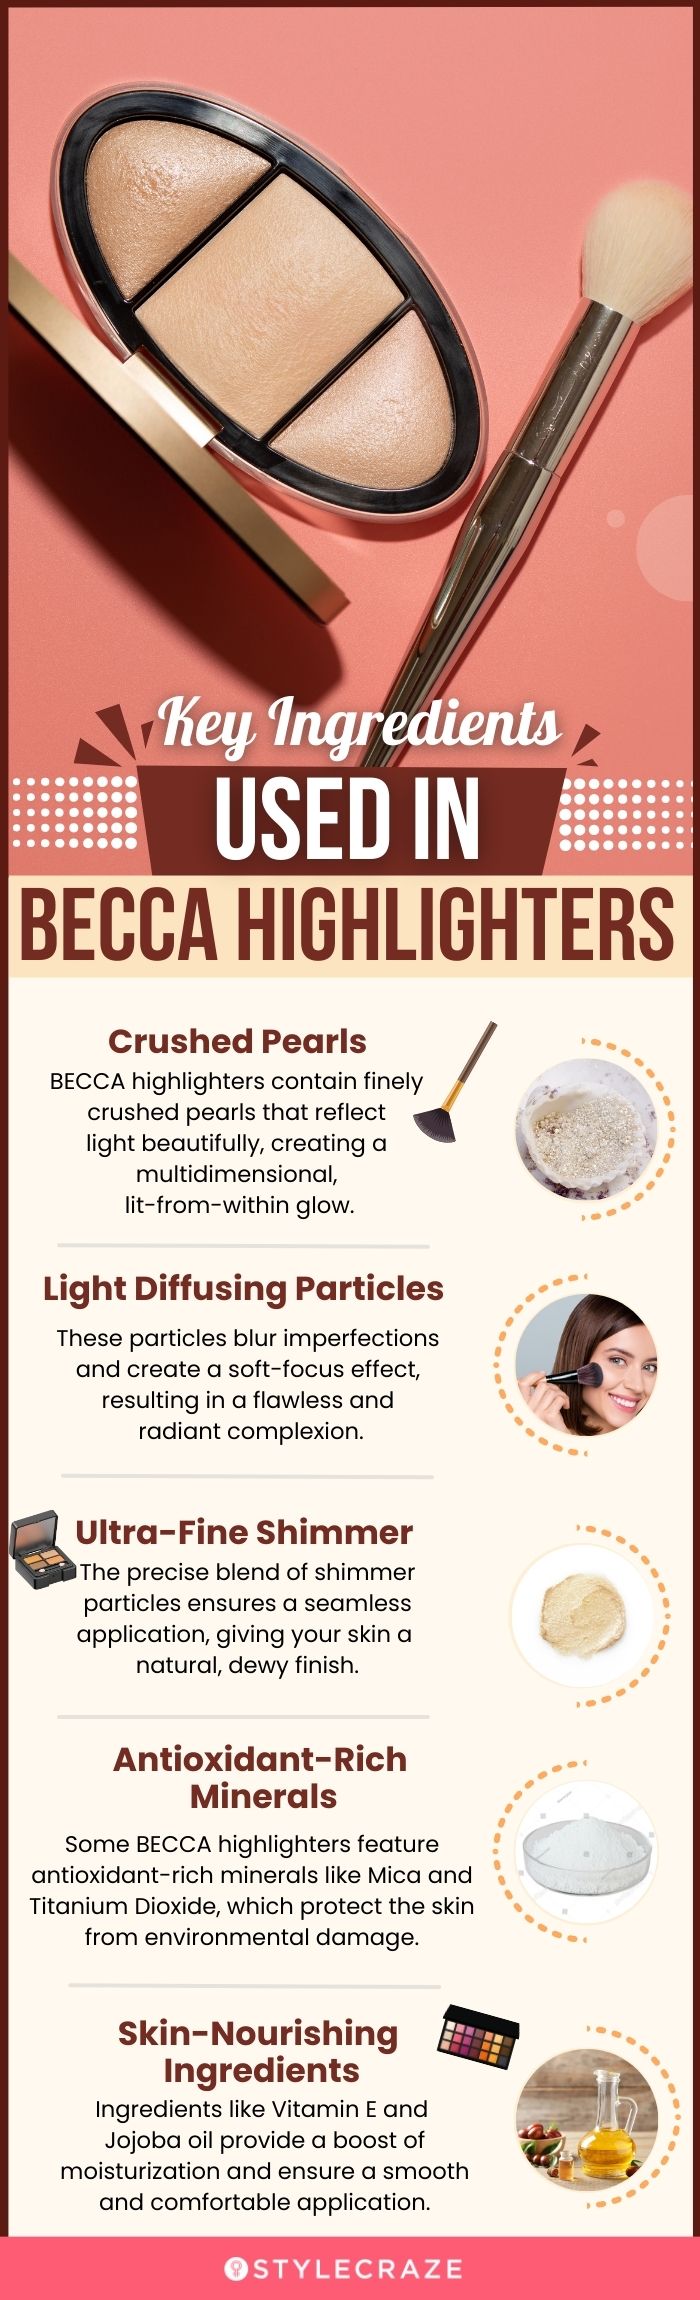 Key Ingredients Used In Best Becca Highlighters (infographic)